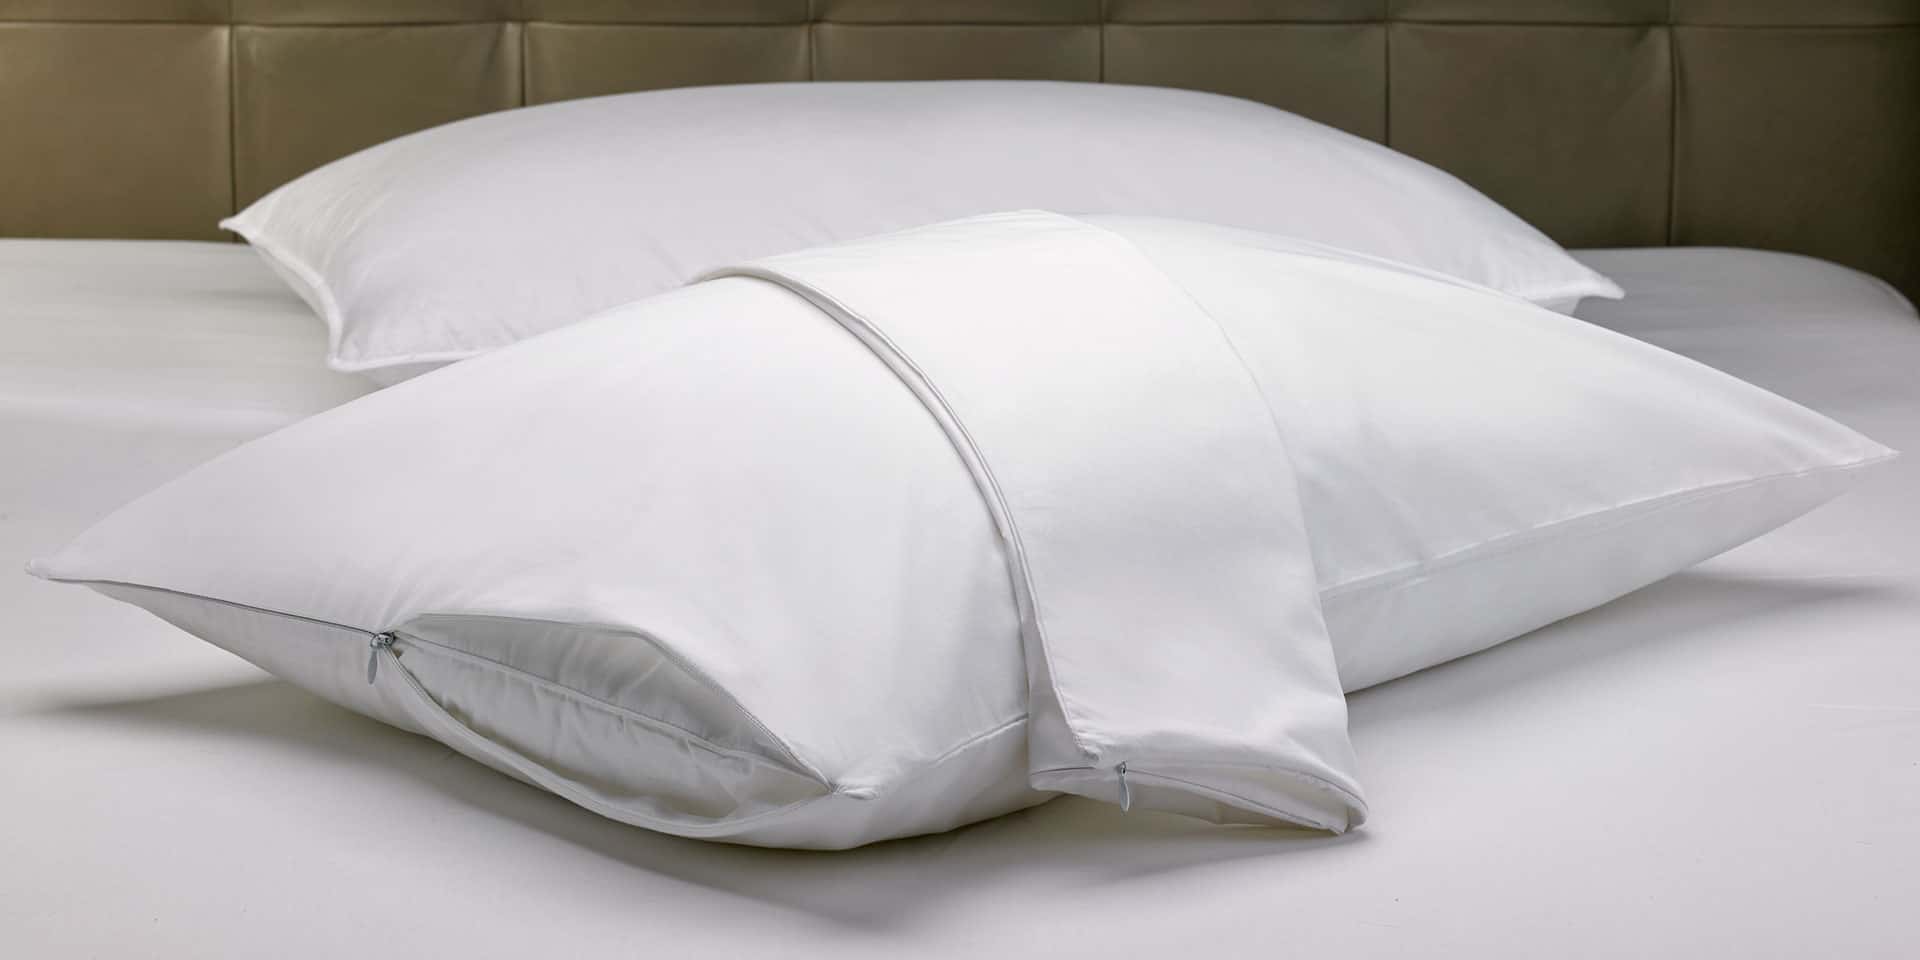 What Pillows Do Marriott Hotels Use